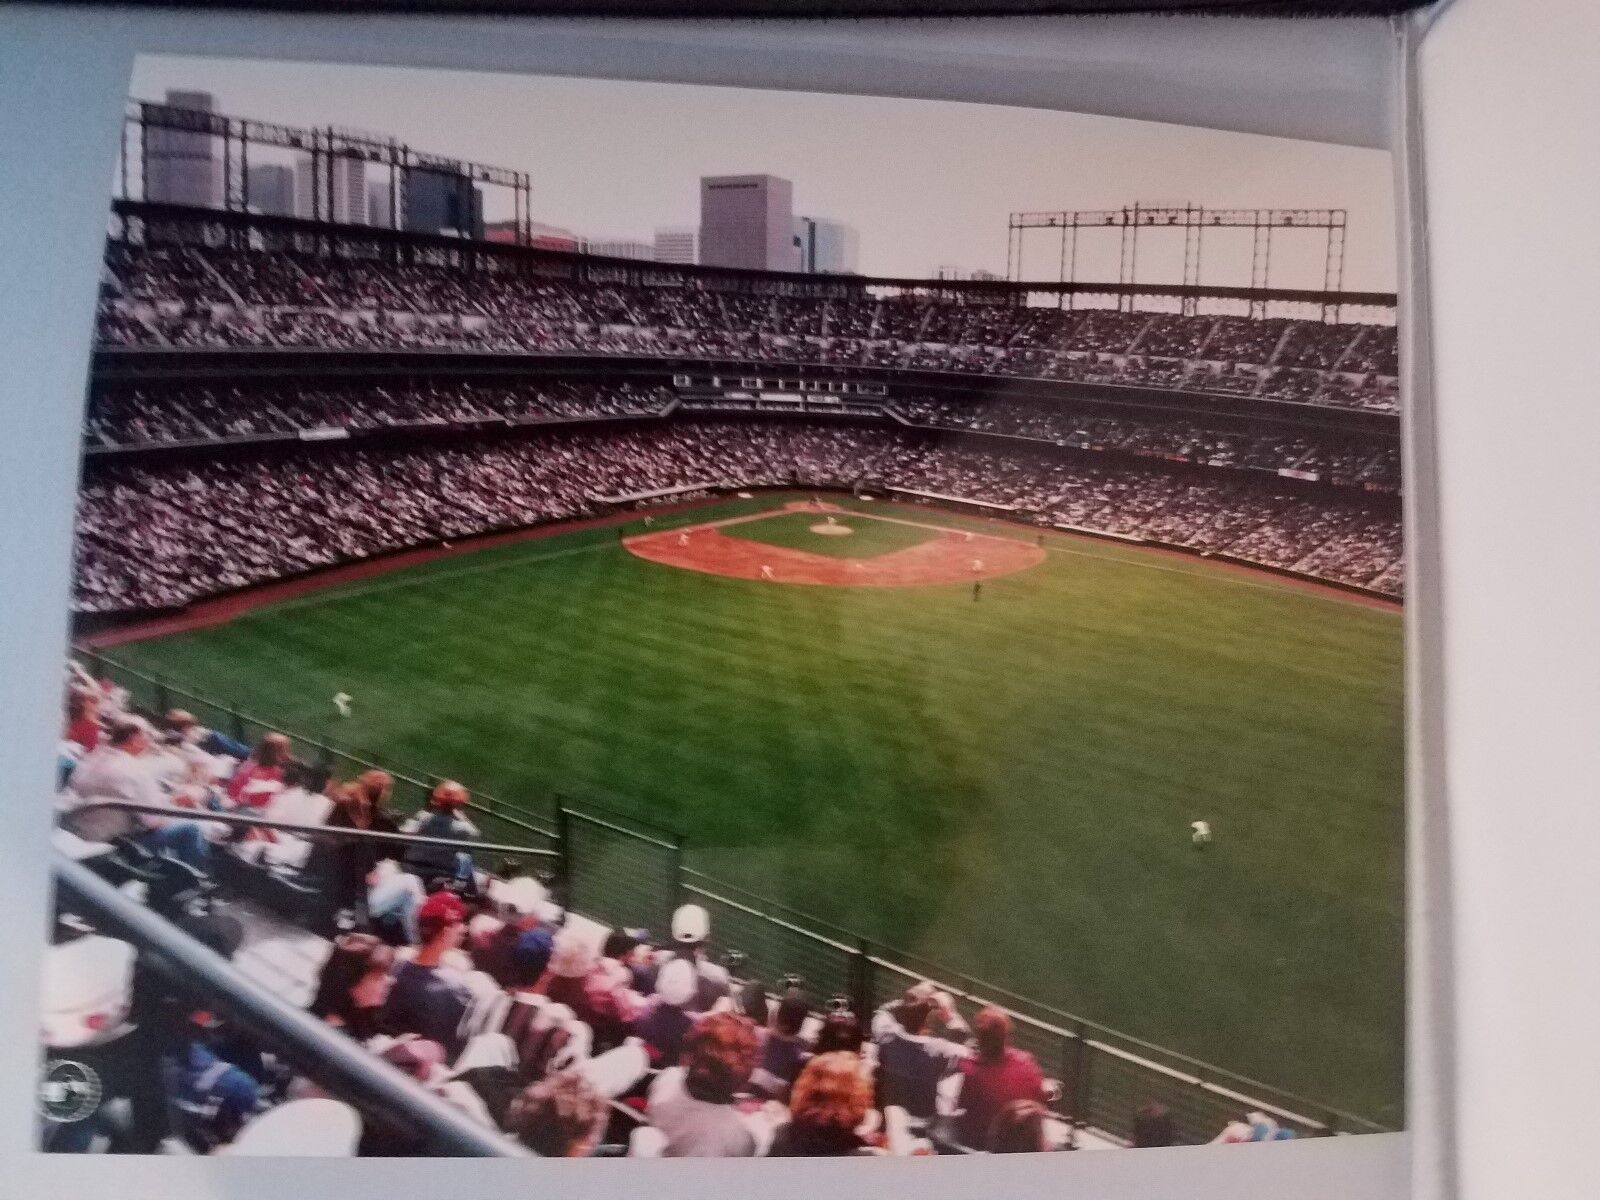 8x10 PHOTO OF COORS FIELD